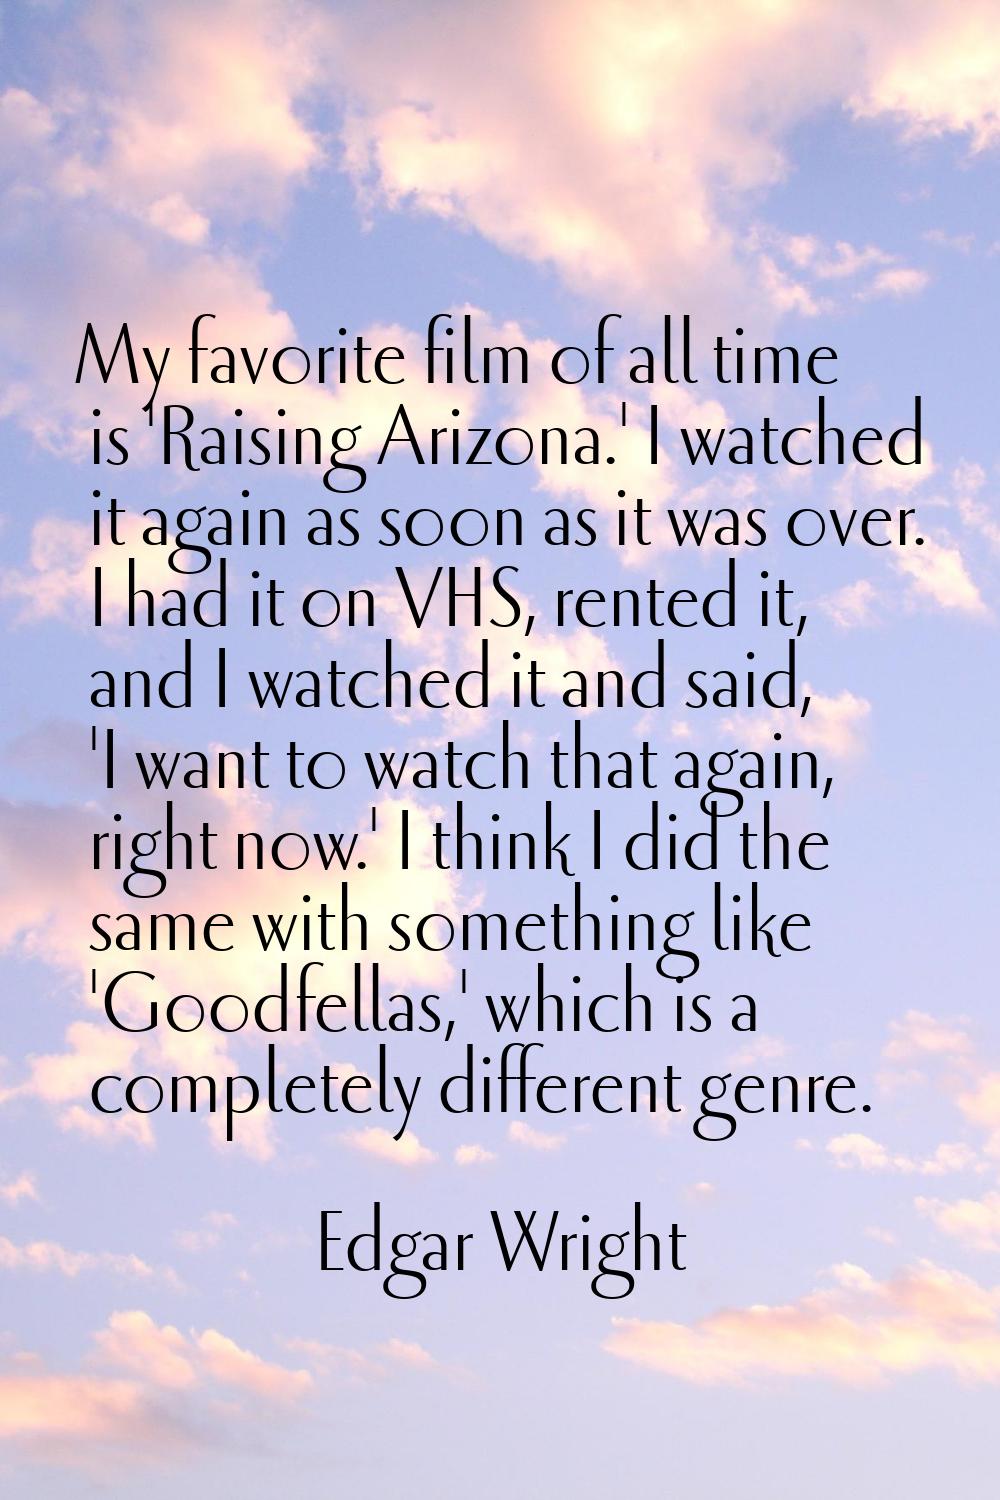 My favorite film of all time is 'Raising Arizona.' I watched it again as soon as it was over. I had